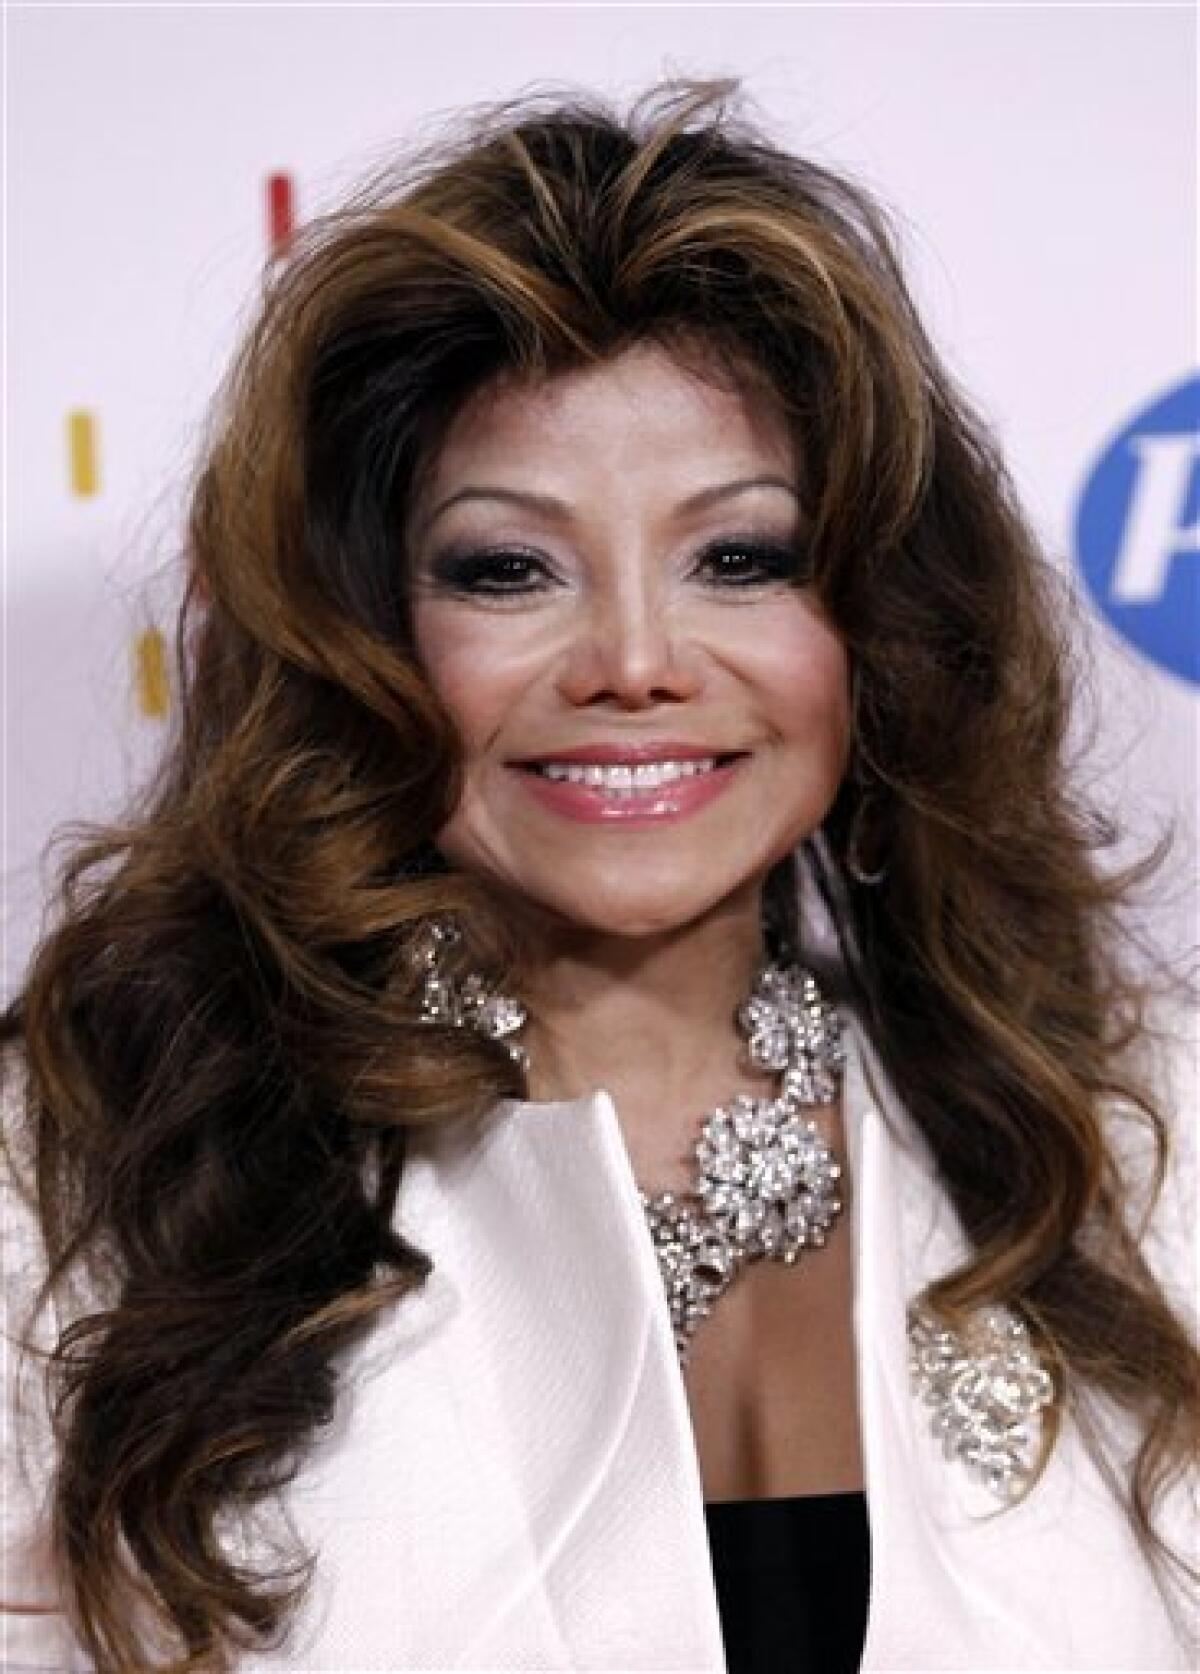 FILE - In this April 29, 2011 file photo LaToya Jackson arrives at the 18th annual Race to Erase MS Gala in Los Angeles. Latoya Jackson says her brother Michael spent the last months of his life frightened and on edge, convinced that he would be killed by people wanting to get access to his valuable music catalog. She makes the claims in her new book, "Starting Over," which also details her brother's struggle with prescription drugs and the day he died, as well as her own troubles, including an abusive marriage to her late ex-manager/husband Jack Gordon. (AP Photo/Matt Sayles, File)